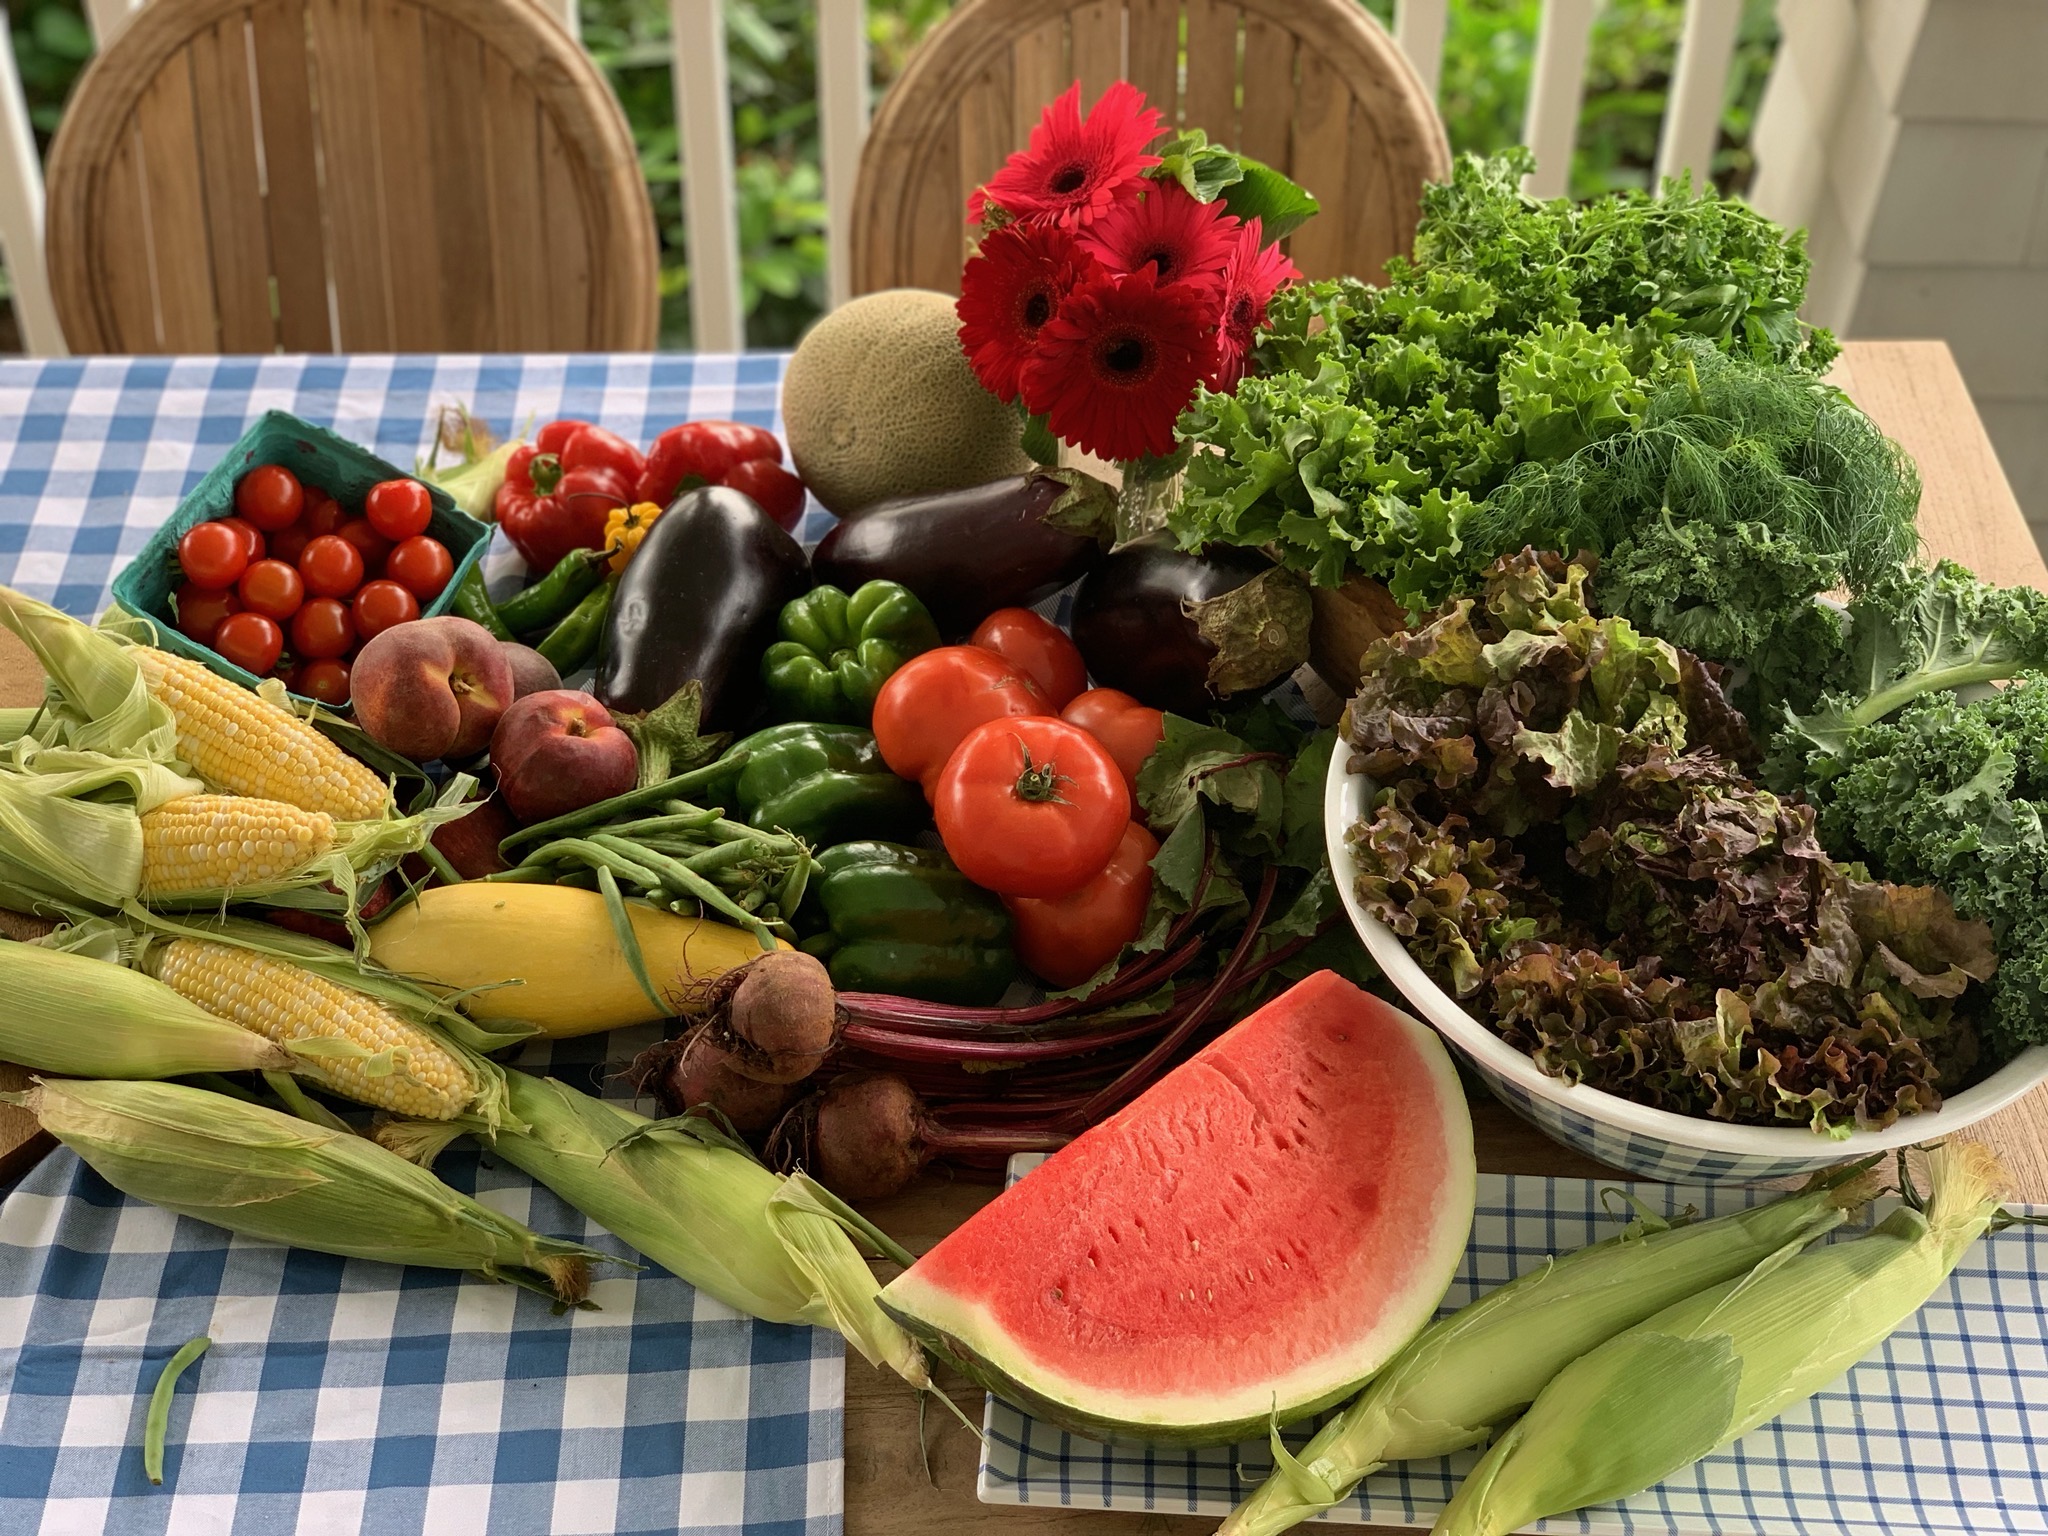 Table of fresh produce